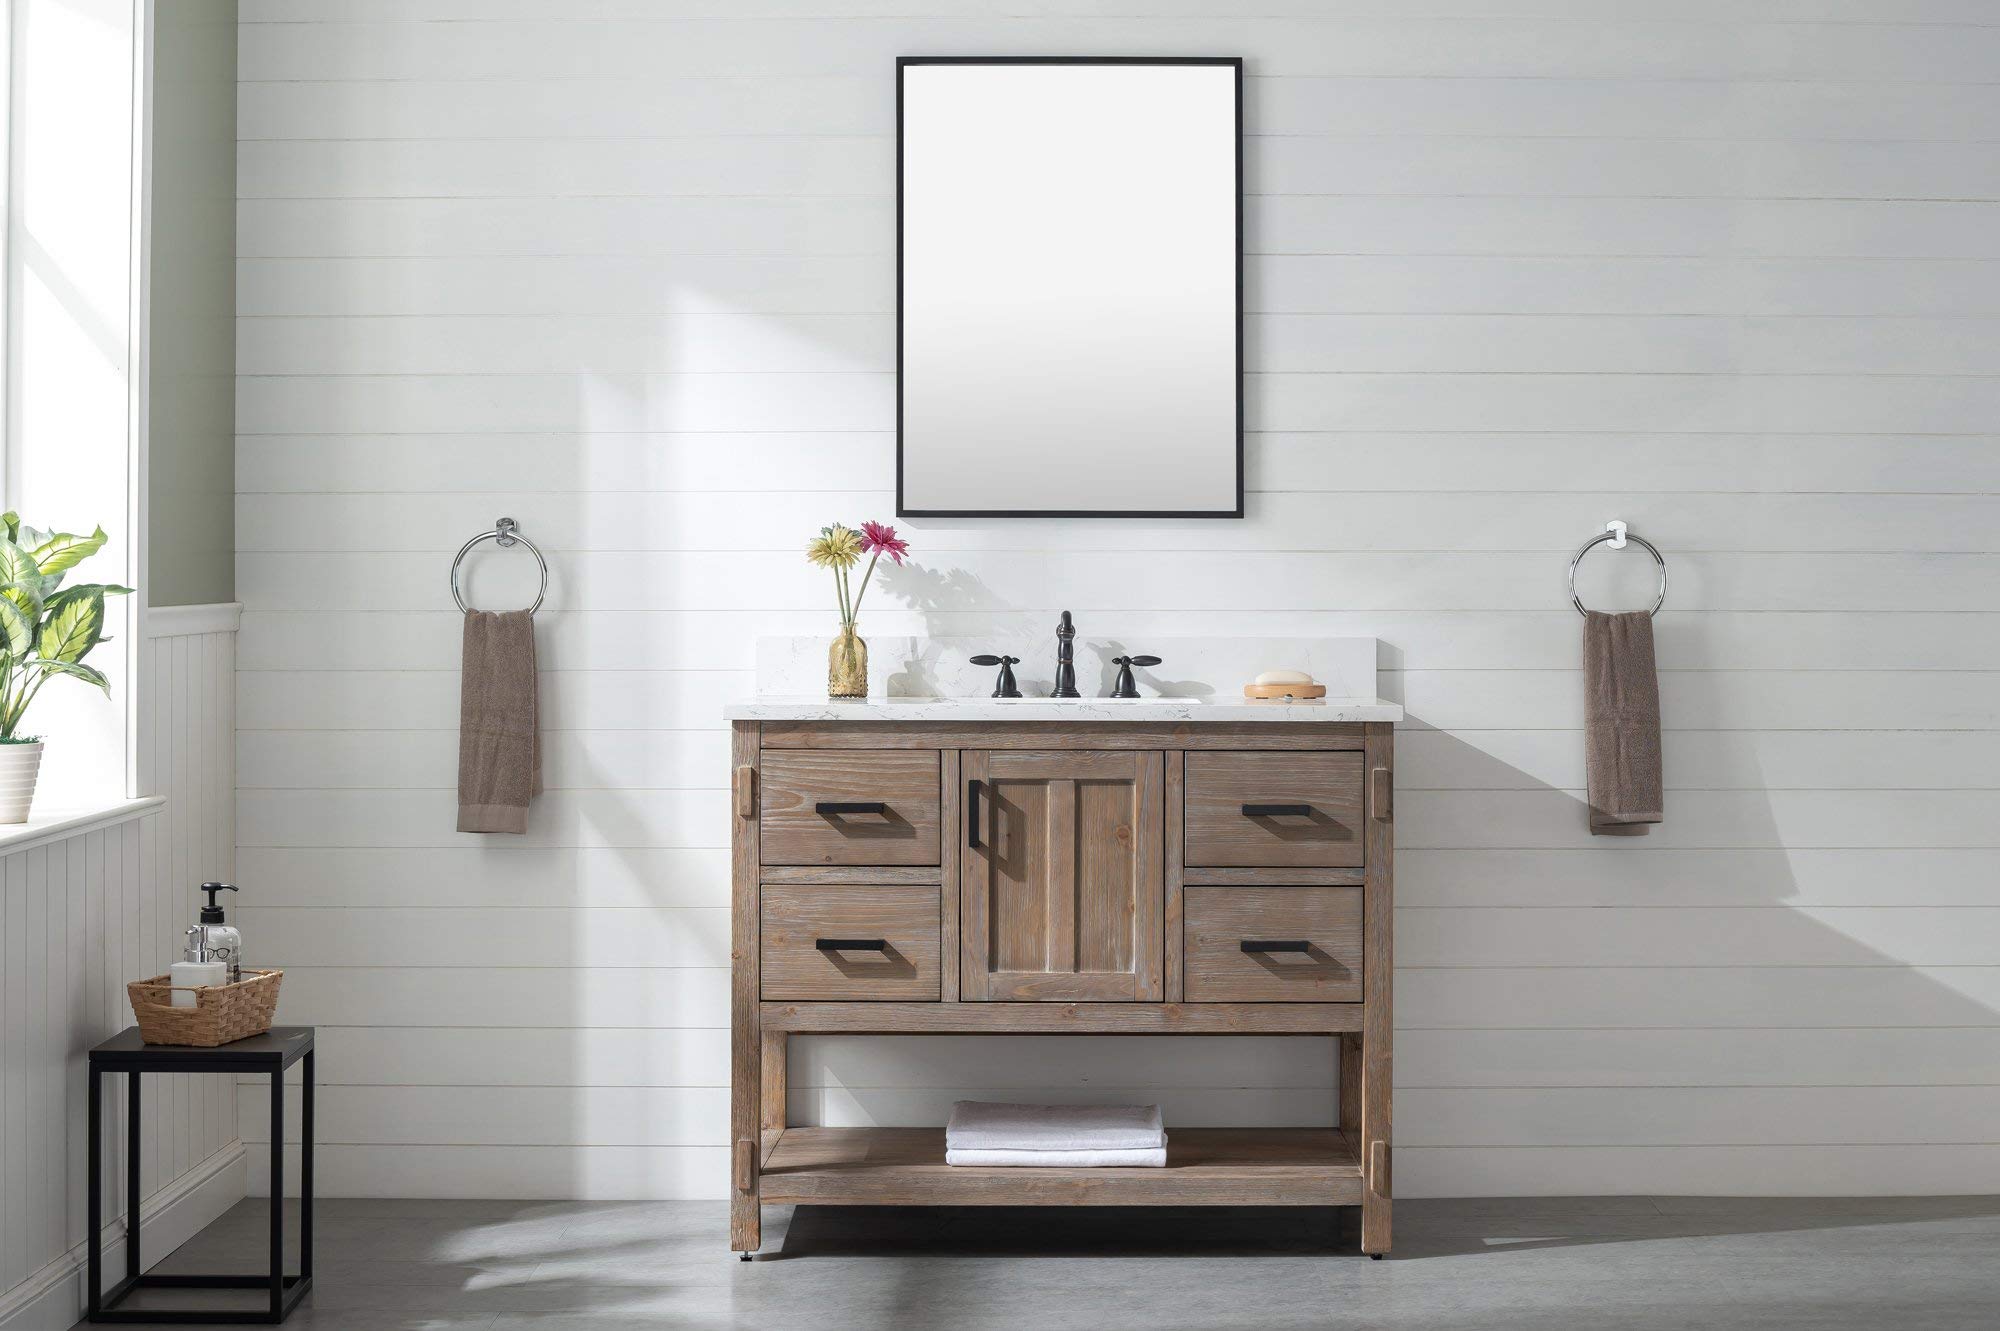 What Is The Ideal Mirror Size For A 42-Inch Vanity